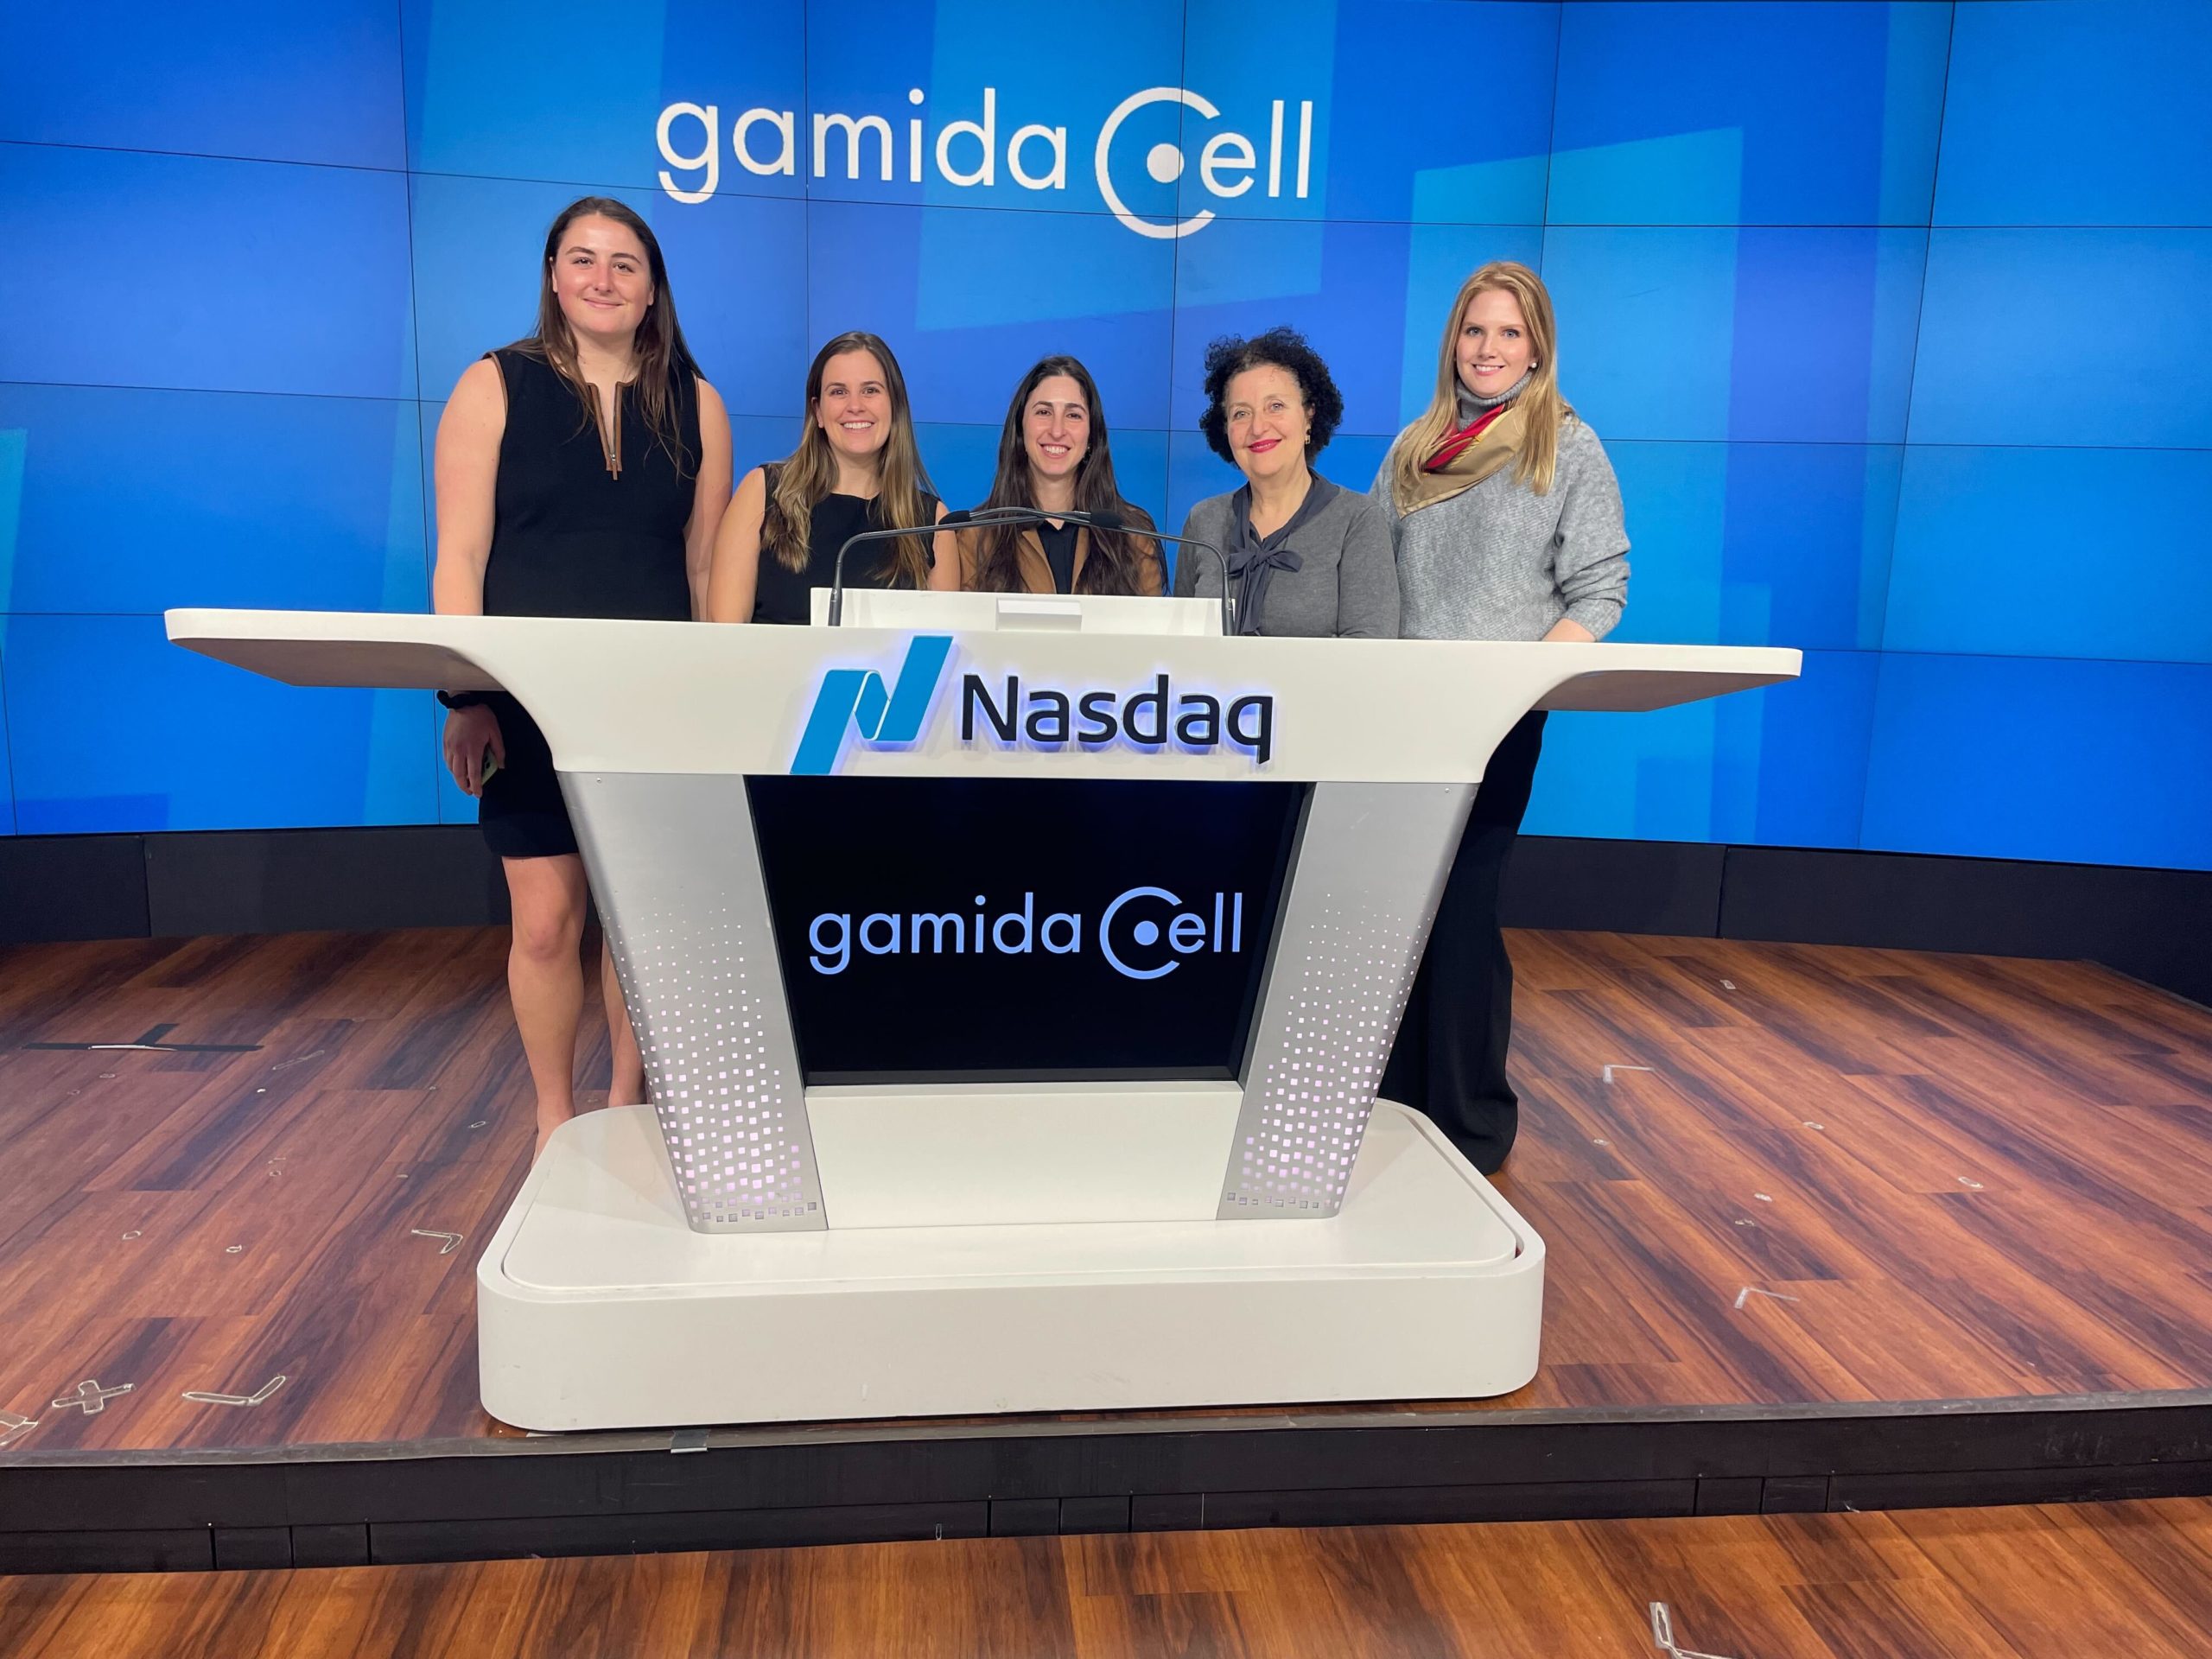 Gamida Cell Ltd. visits the Nasdaq MarketSite in Times Square NYC to ring the closing bell (Februray 6, 2023)